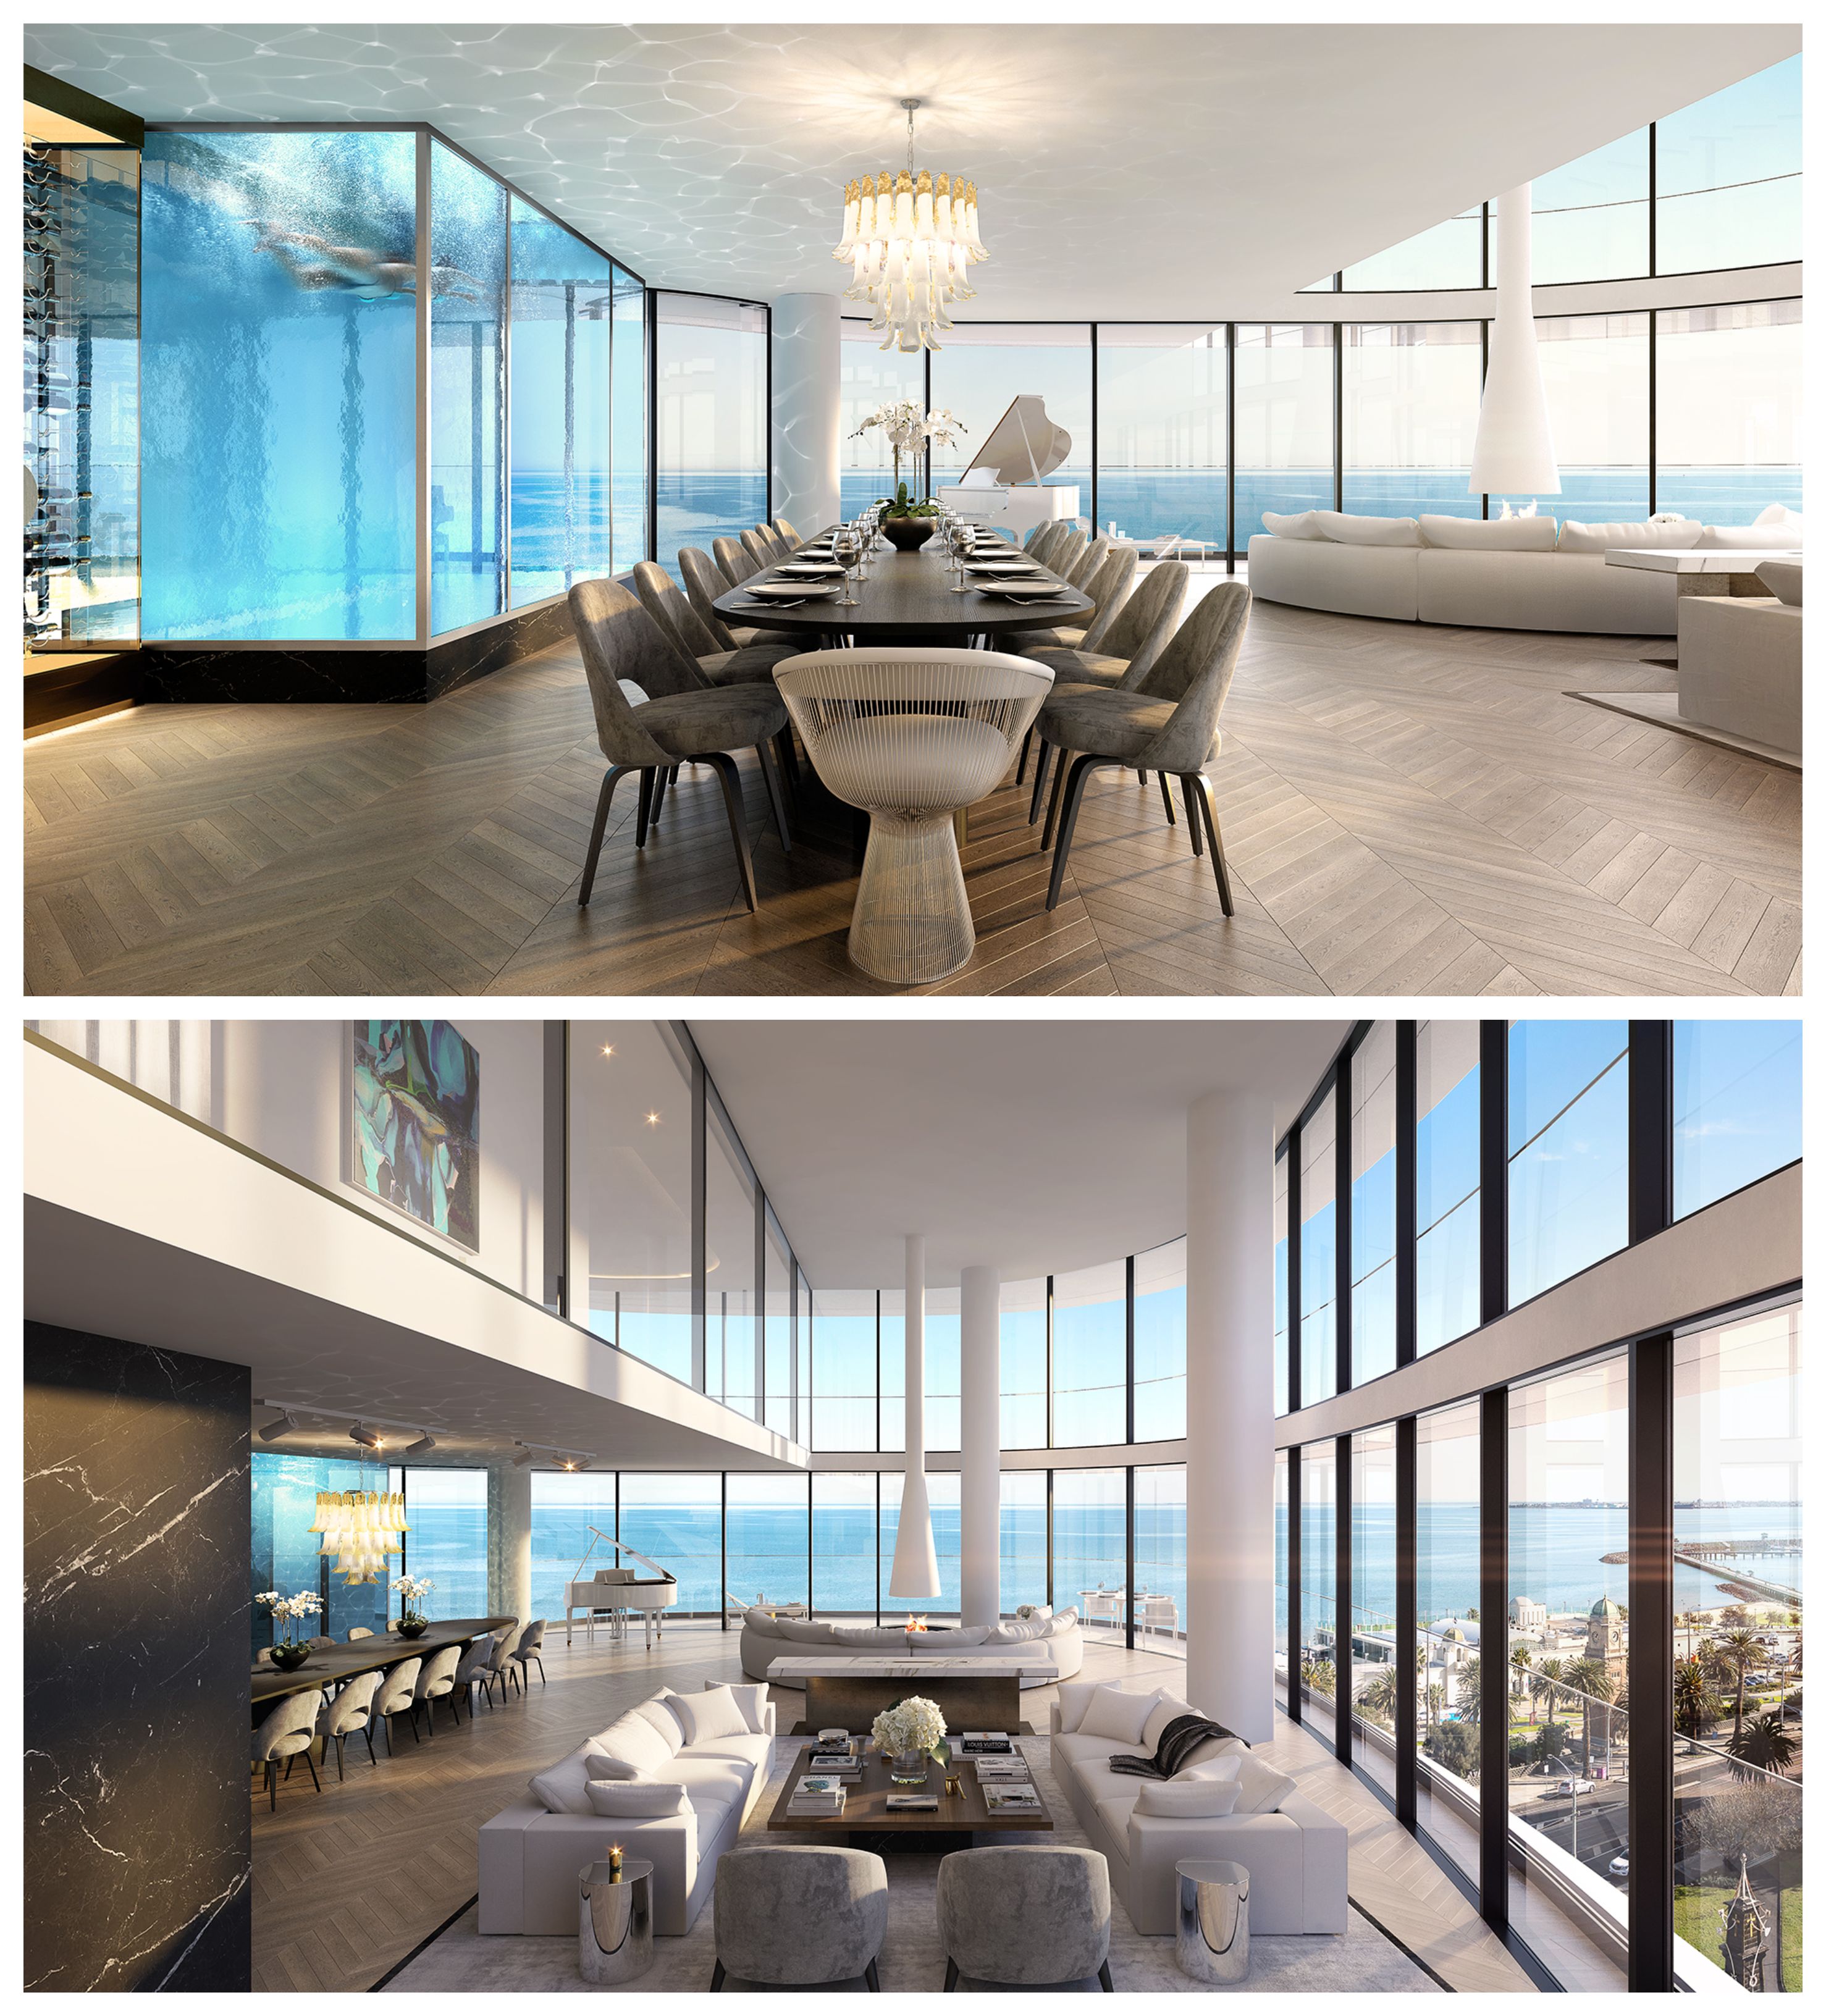 The penthouse